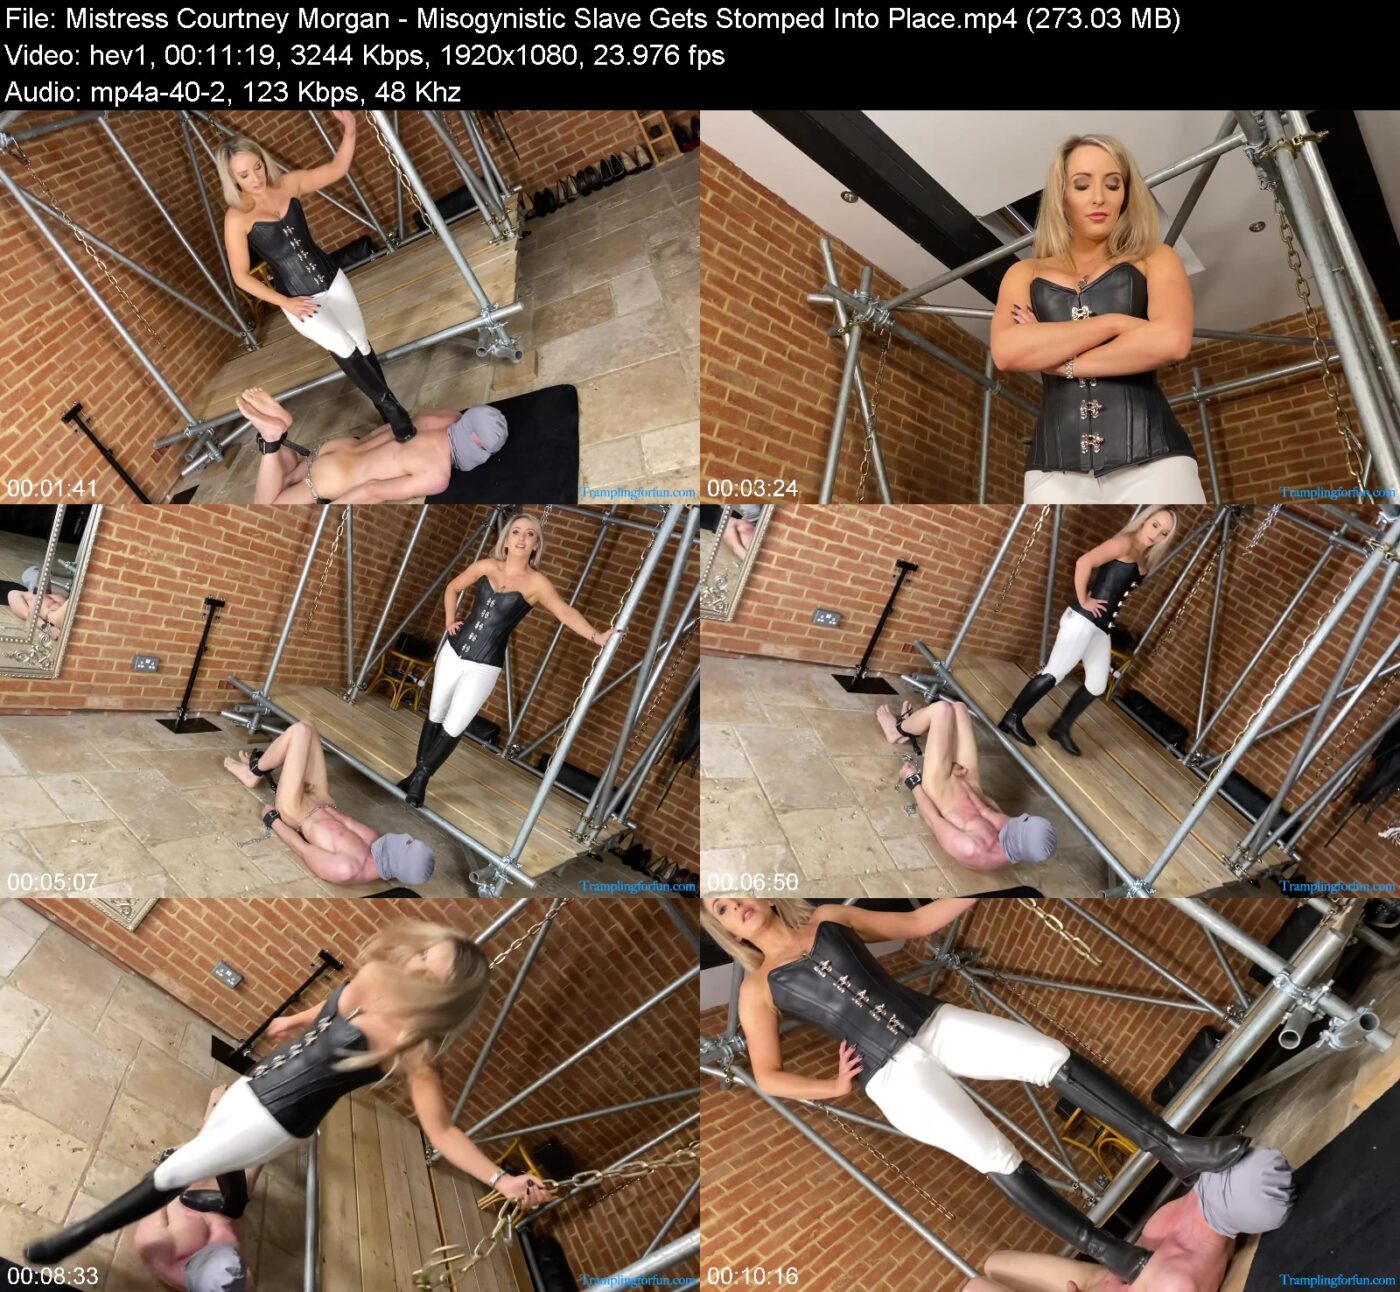 Mistress Courtney Morgan in Misogynistic Slave Gets Stomped Into Place